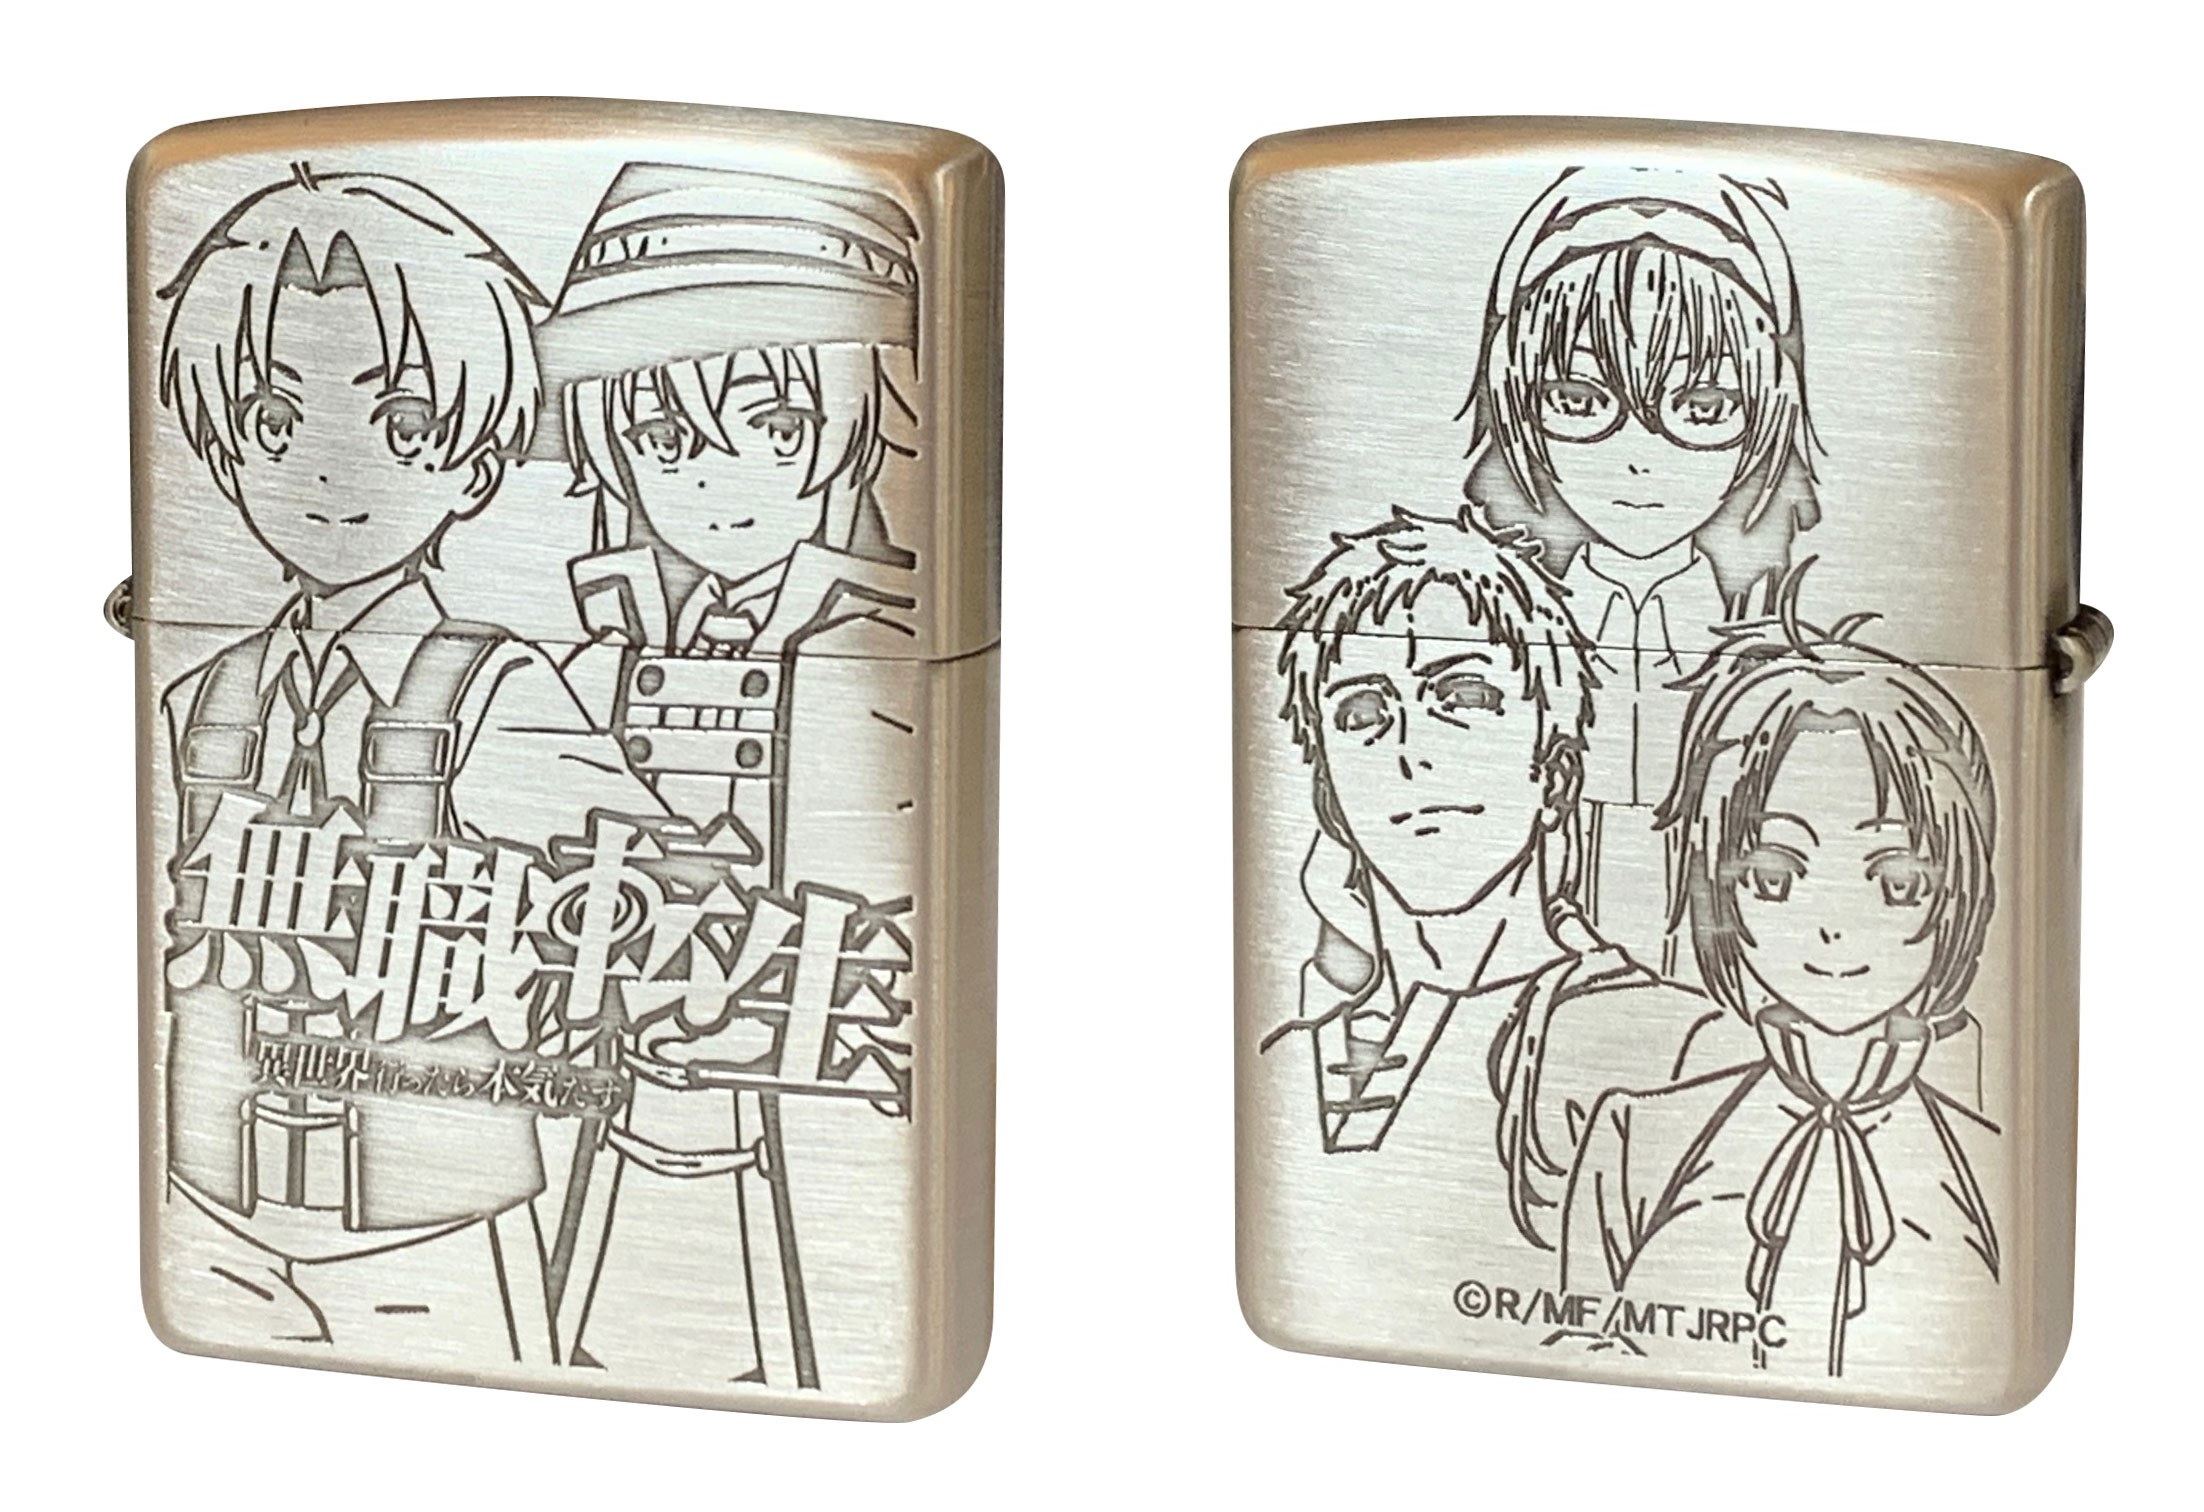 Zippo and Studio Ghibli team up for new lighter designs - Japan Today